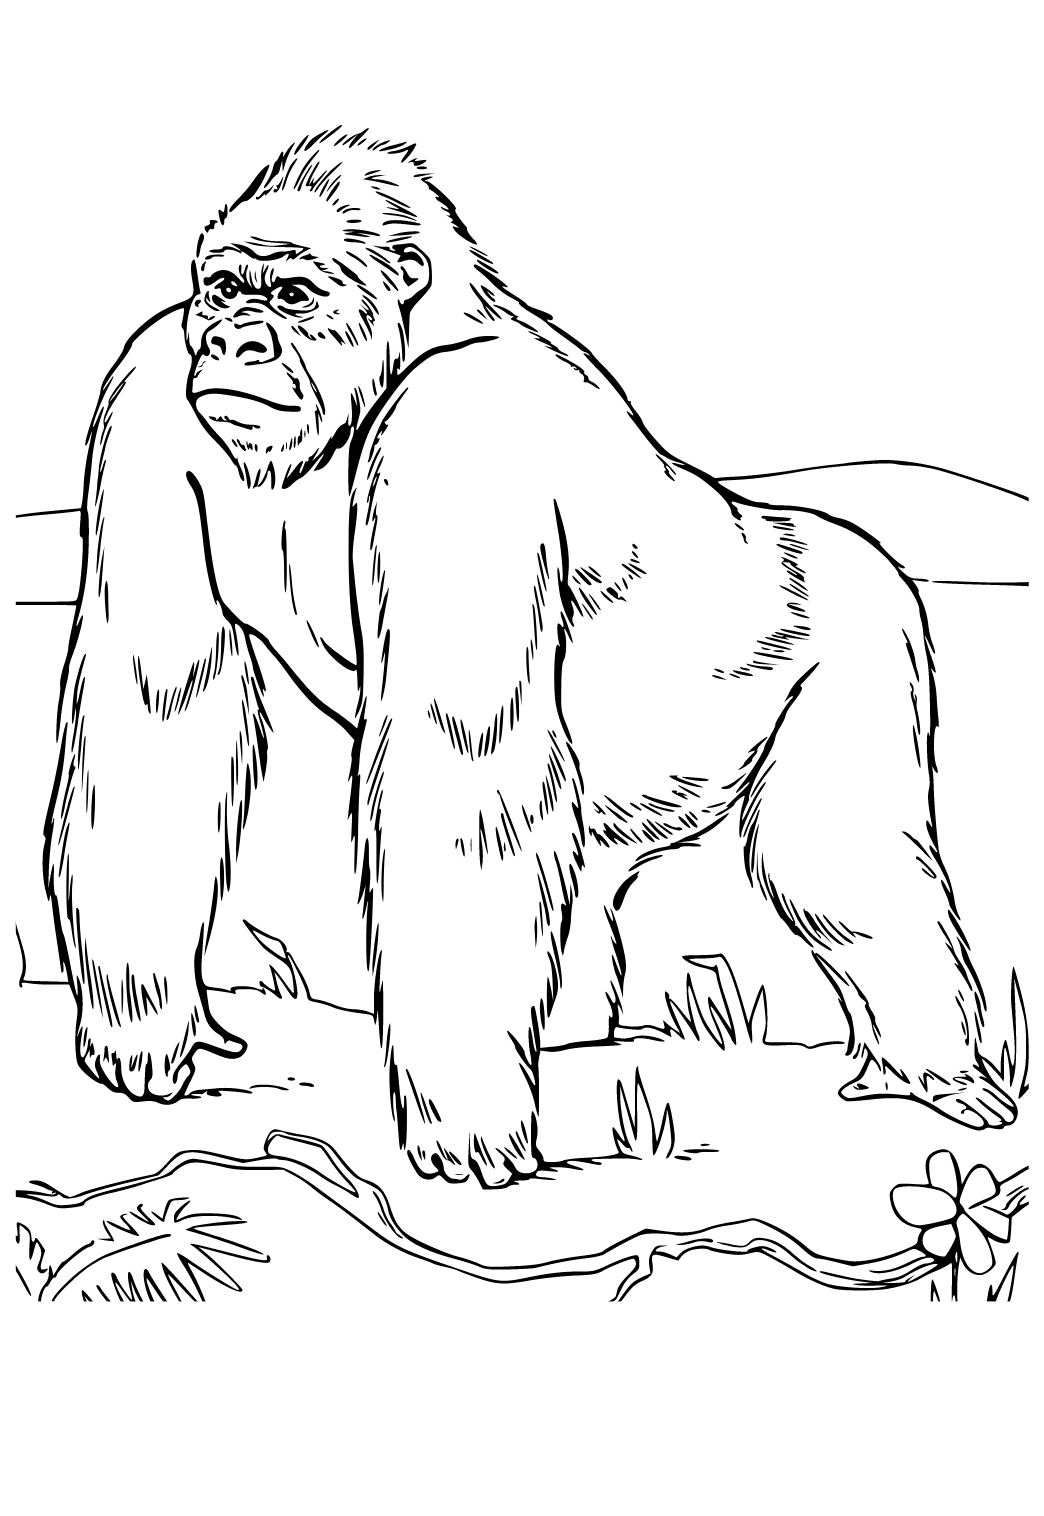 good night gorilla coloring pages